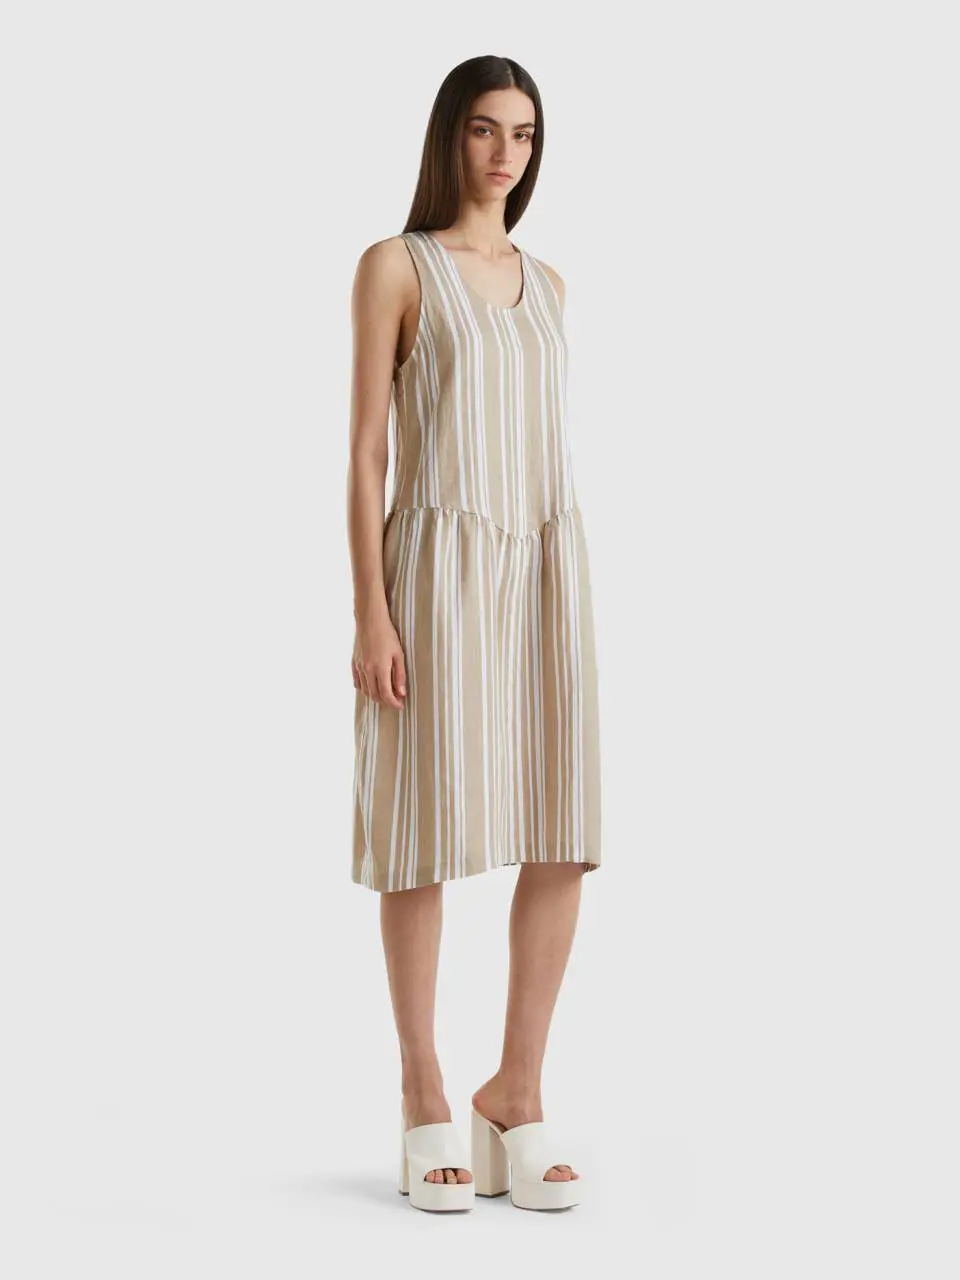 Benetton dress in pure printed linen. 1